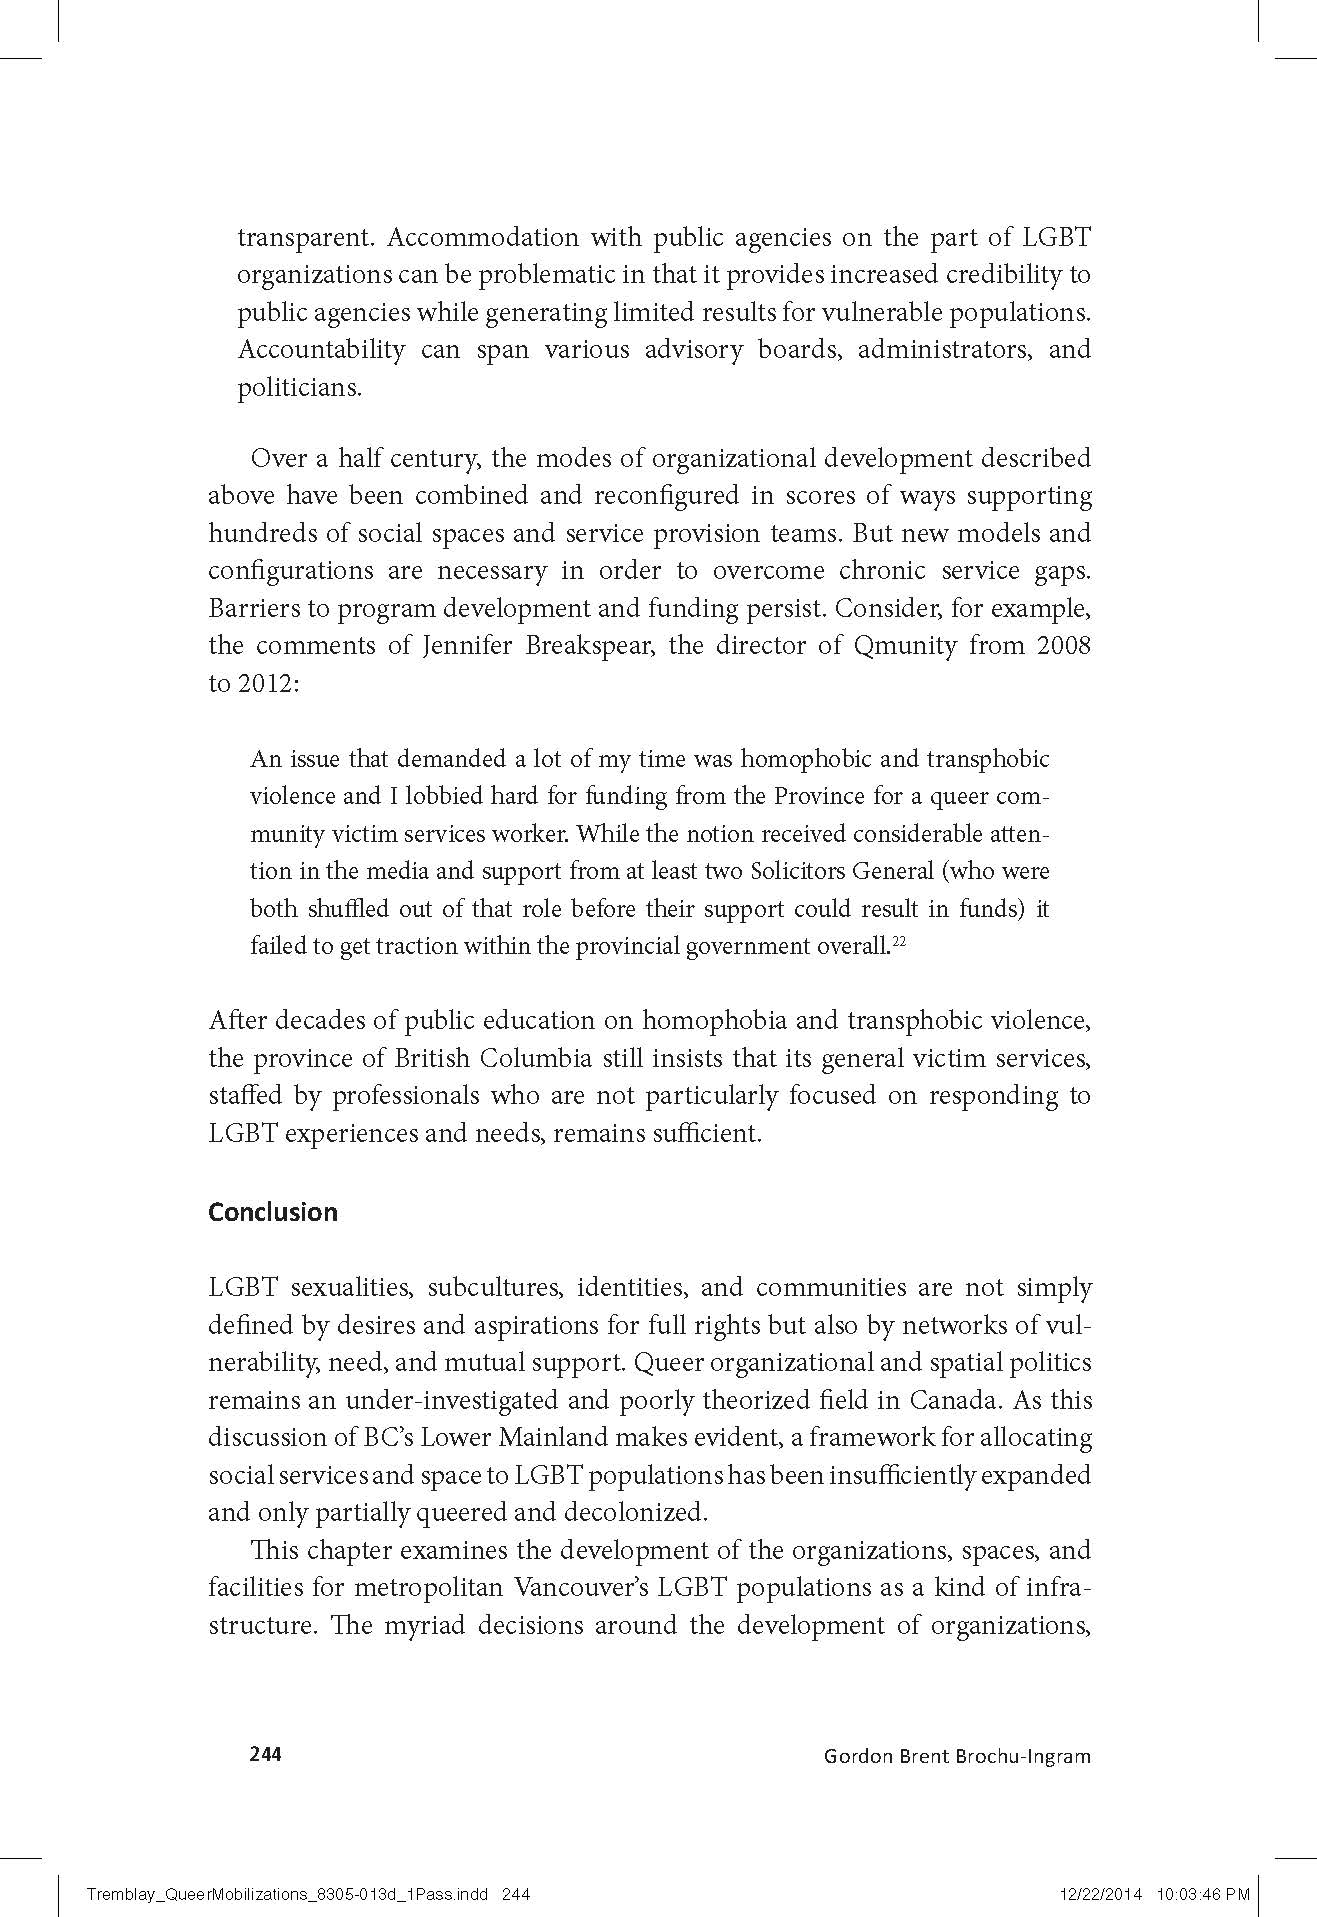 Brochu-Ingram 2015 Q infrastructure in Queer Mobilizations_Page_18